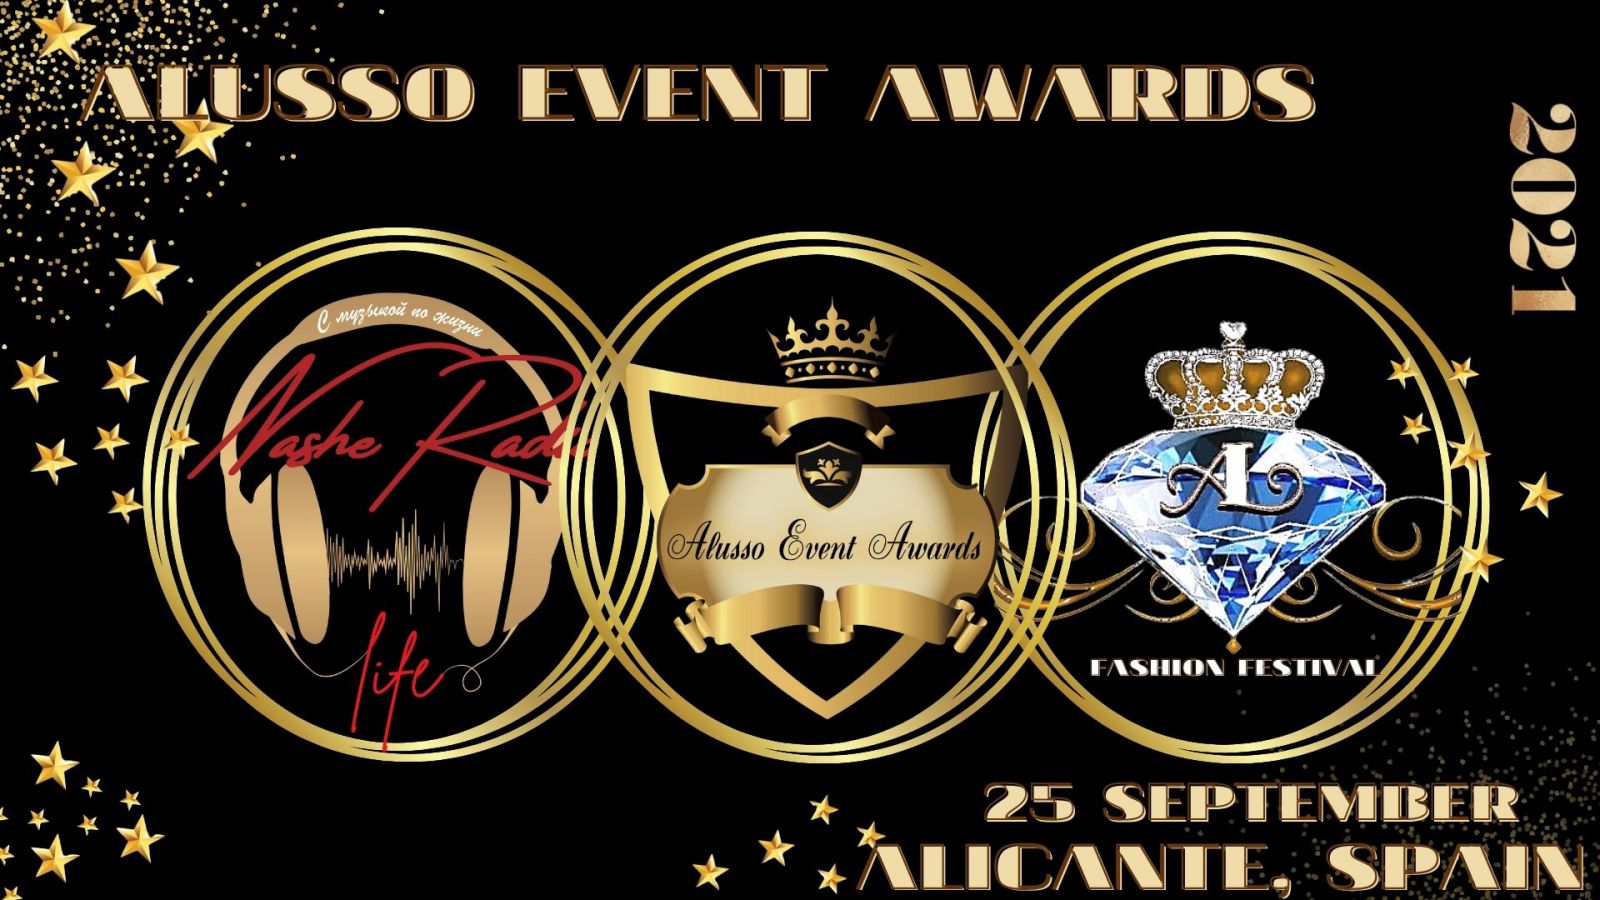 Alusso Event Awards 2021